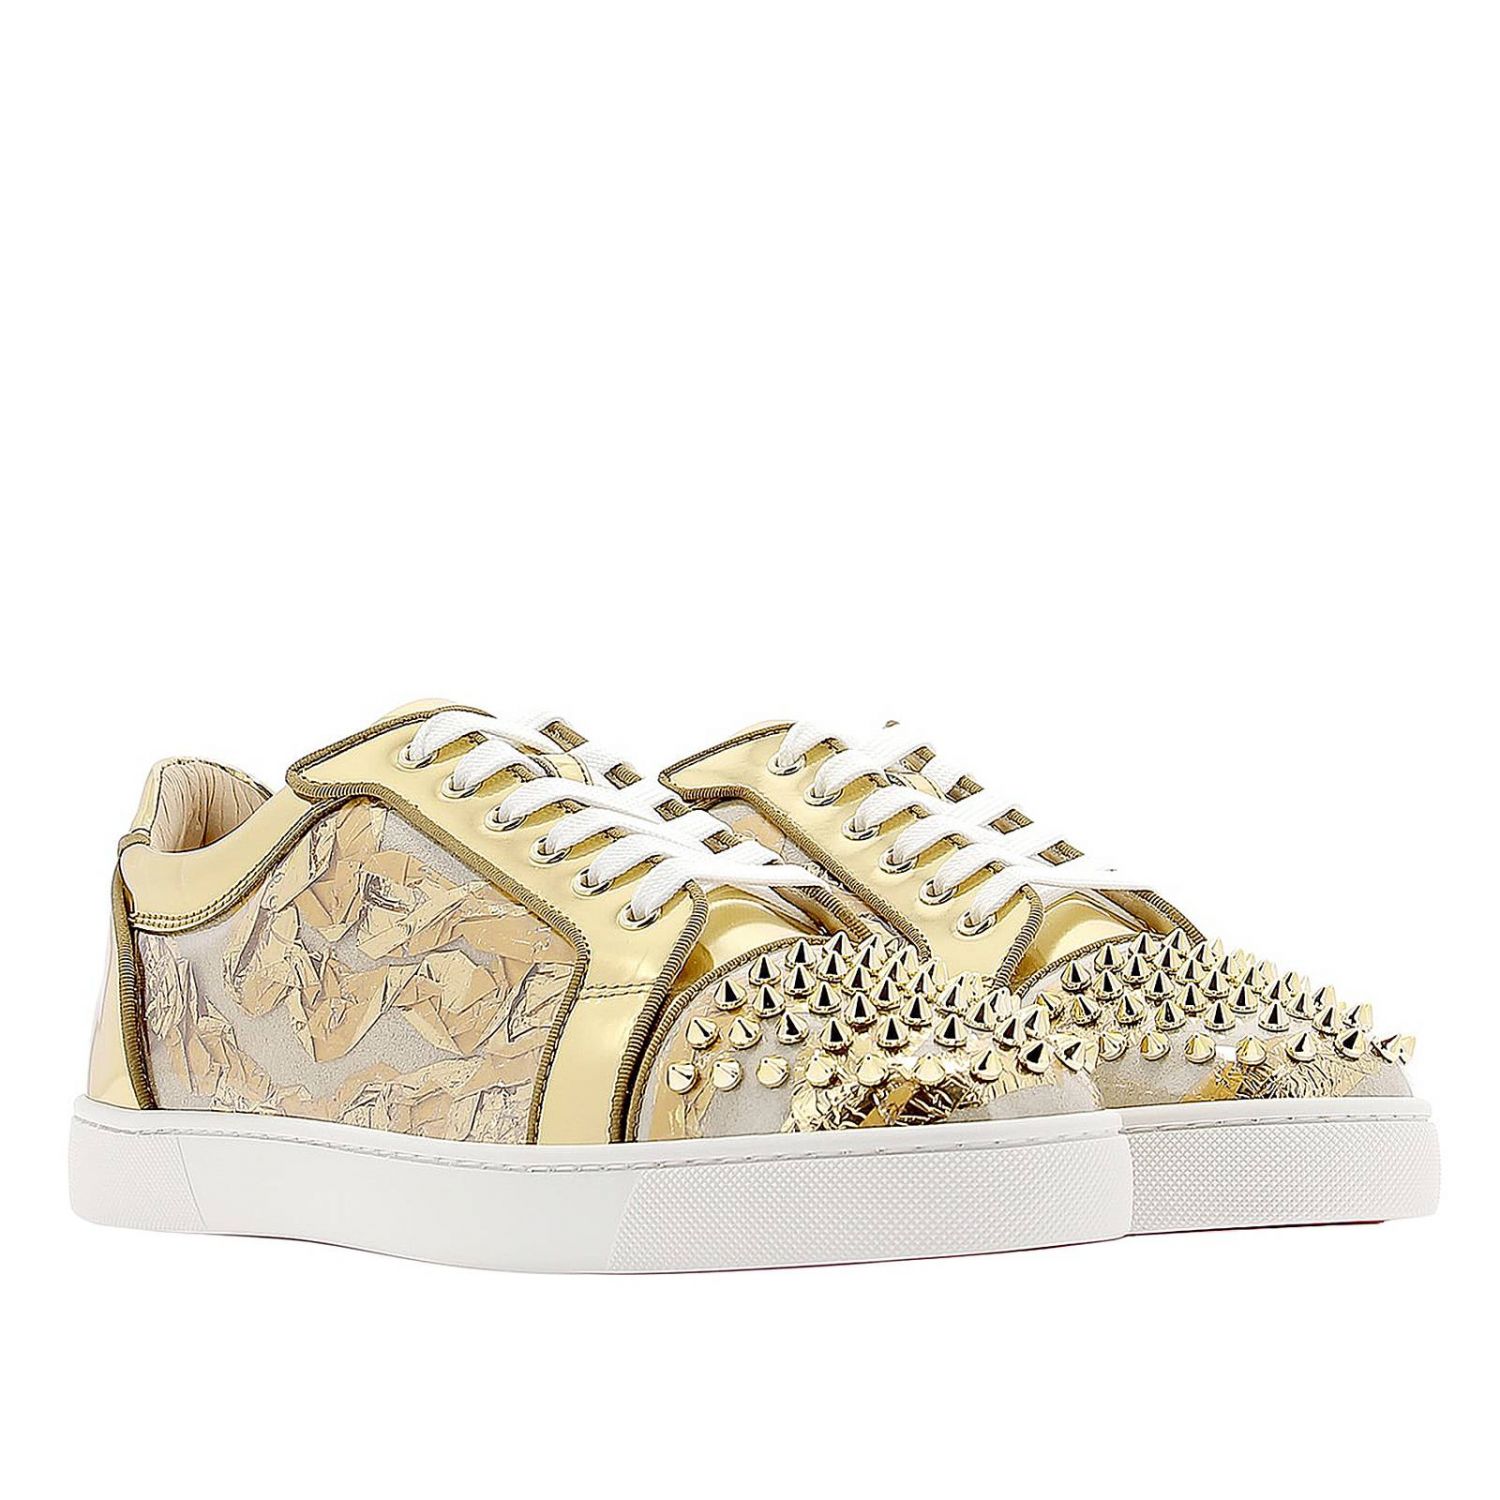 Buy > gold louboutin trainers > in stock